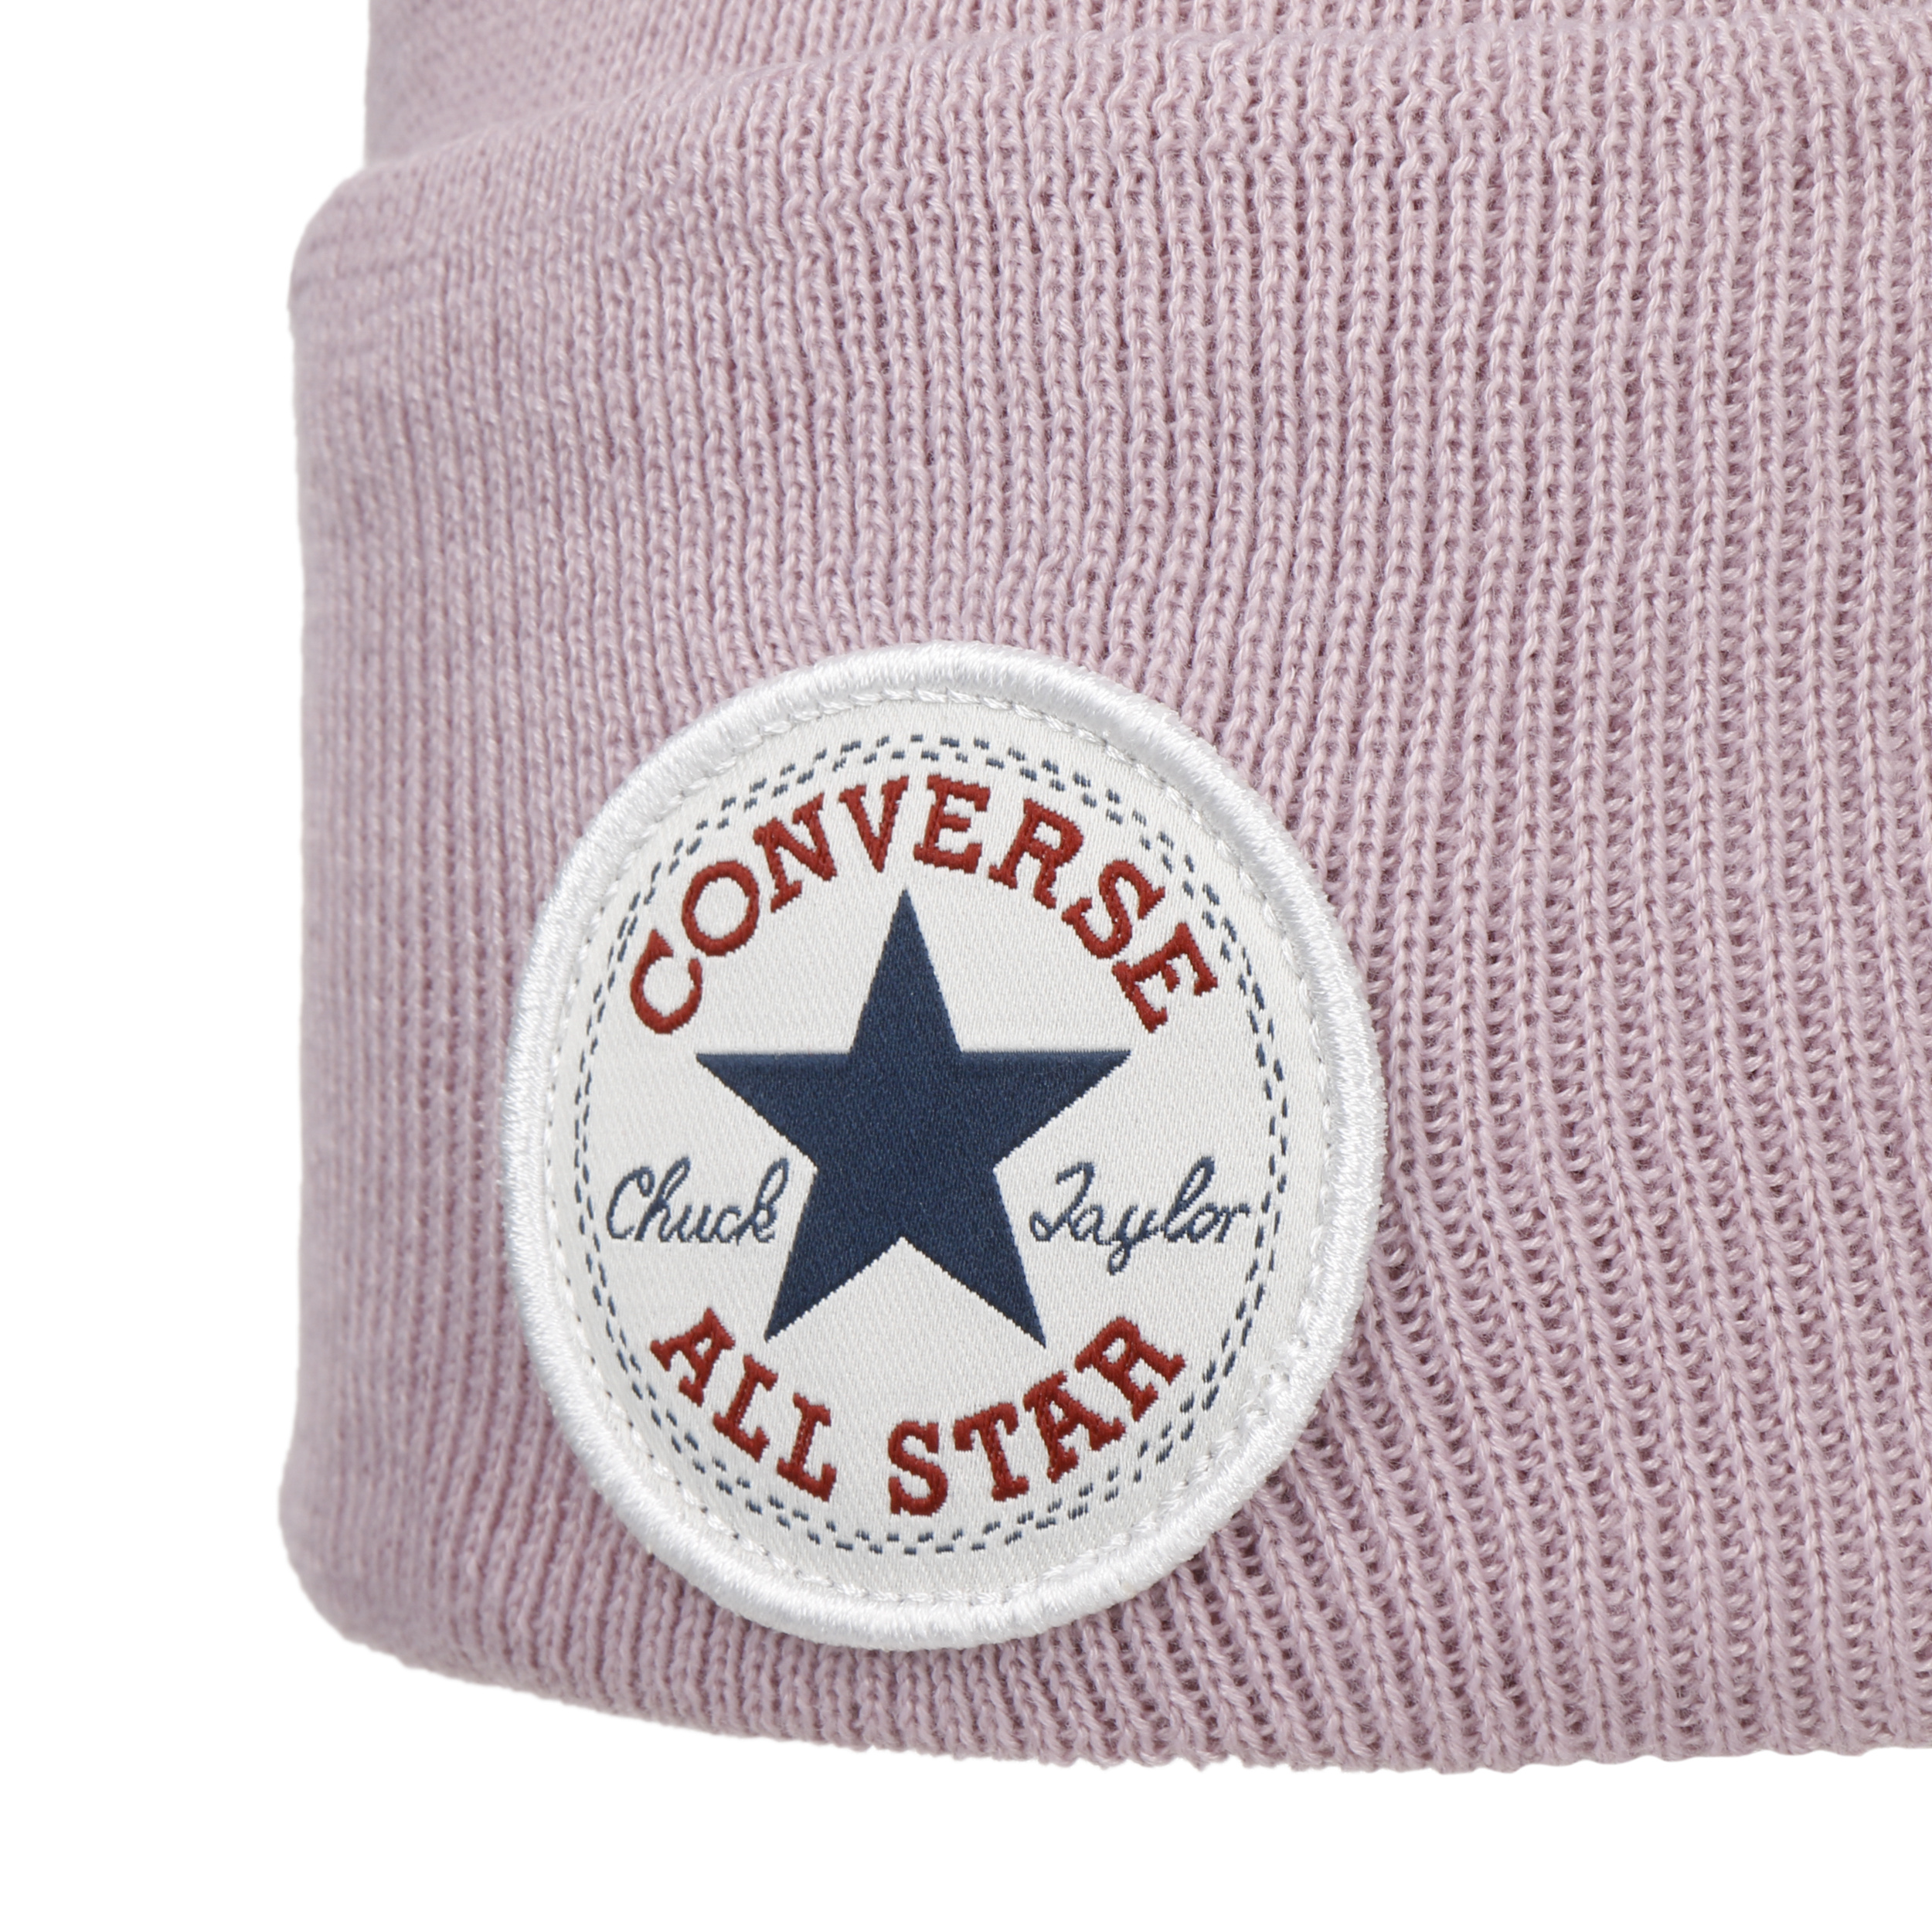 € Chuck Converse by - Hat 32,95 Beanie Patch